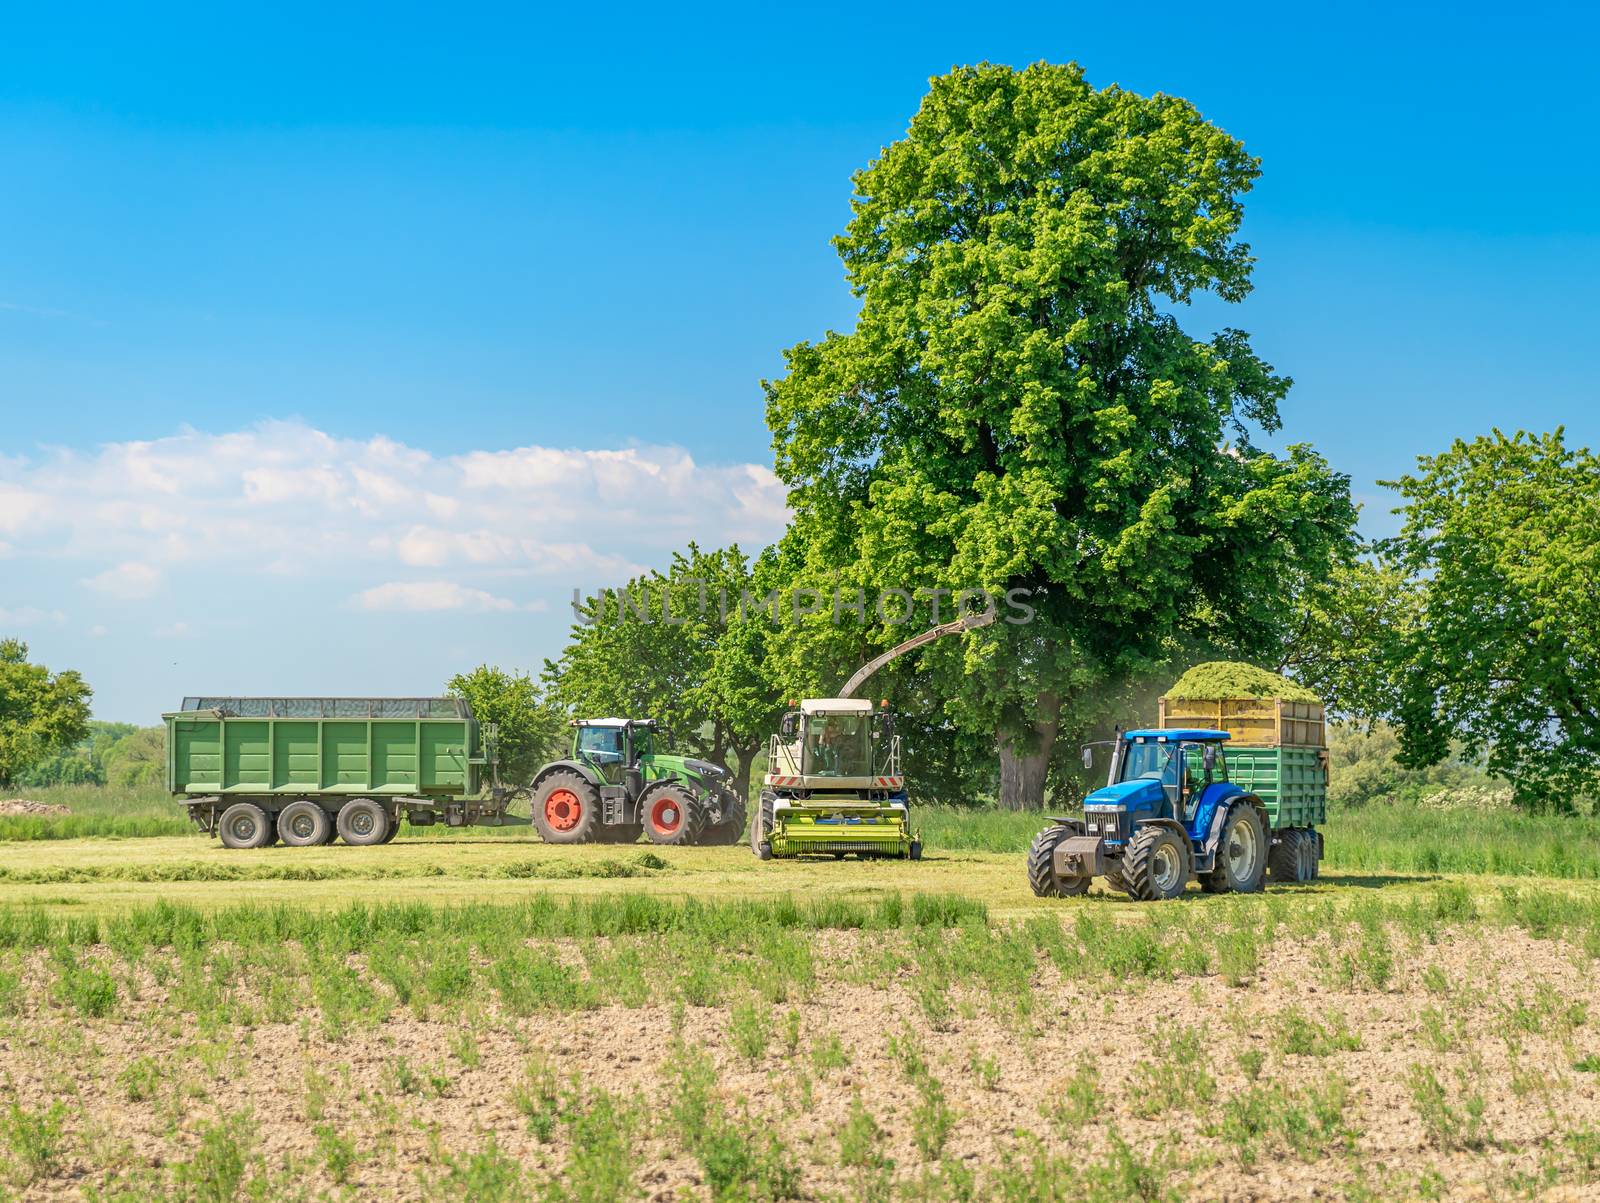 harvesting hay from the field with the help of a combine harvester and a tractor by Edophoto